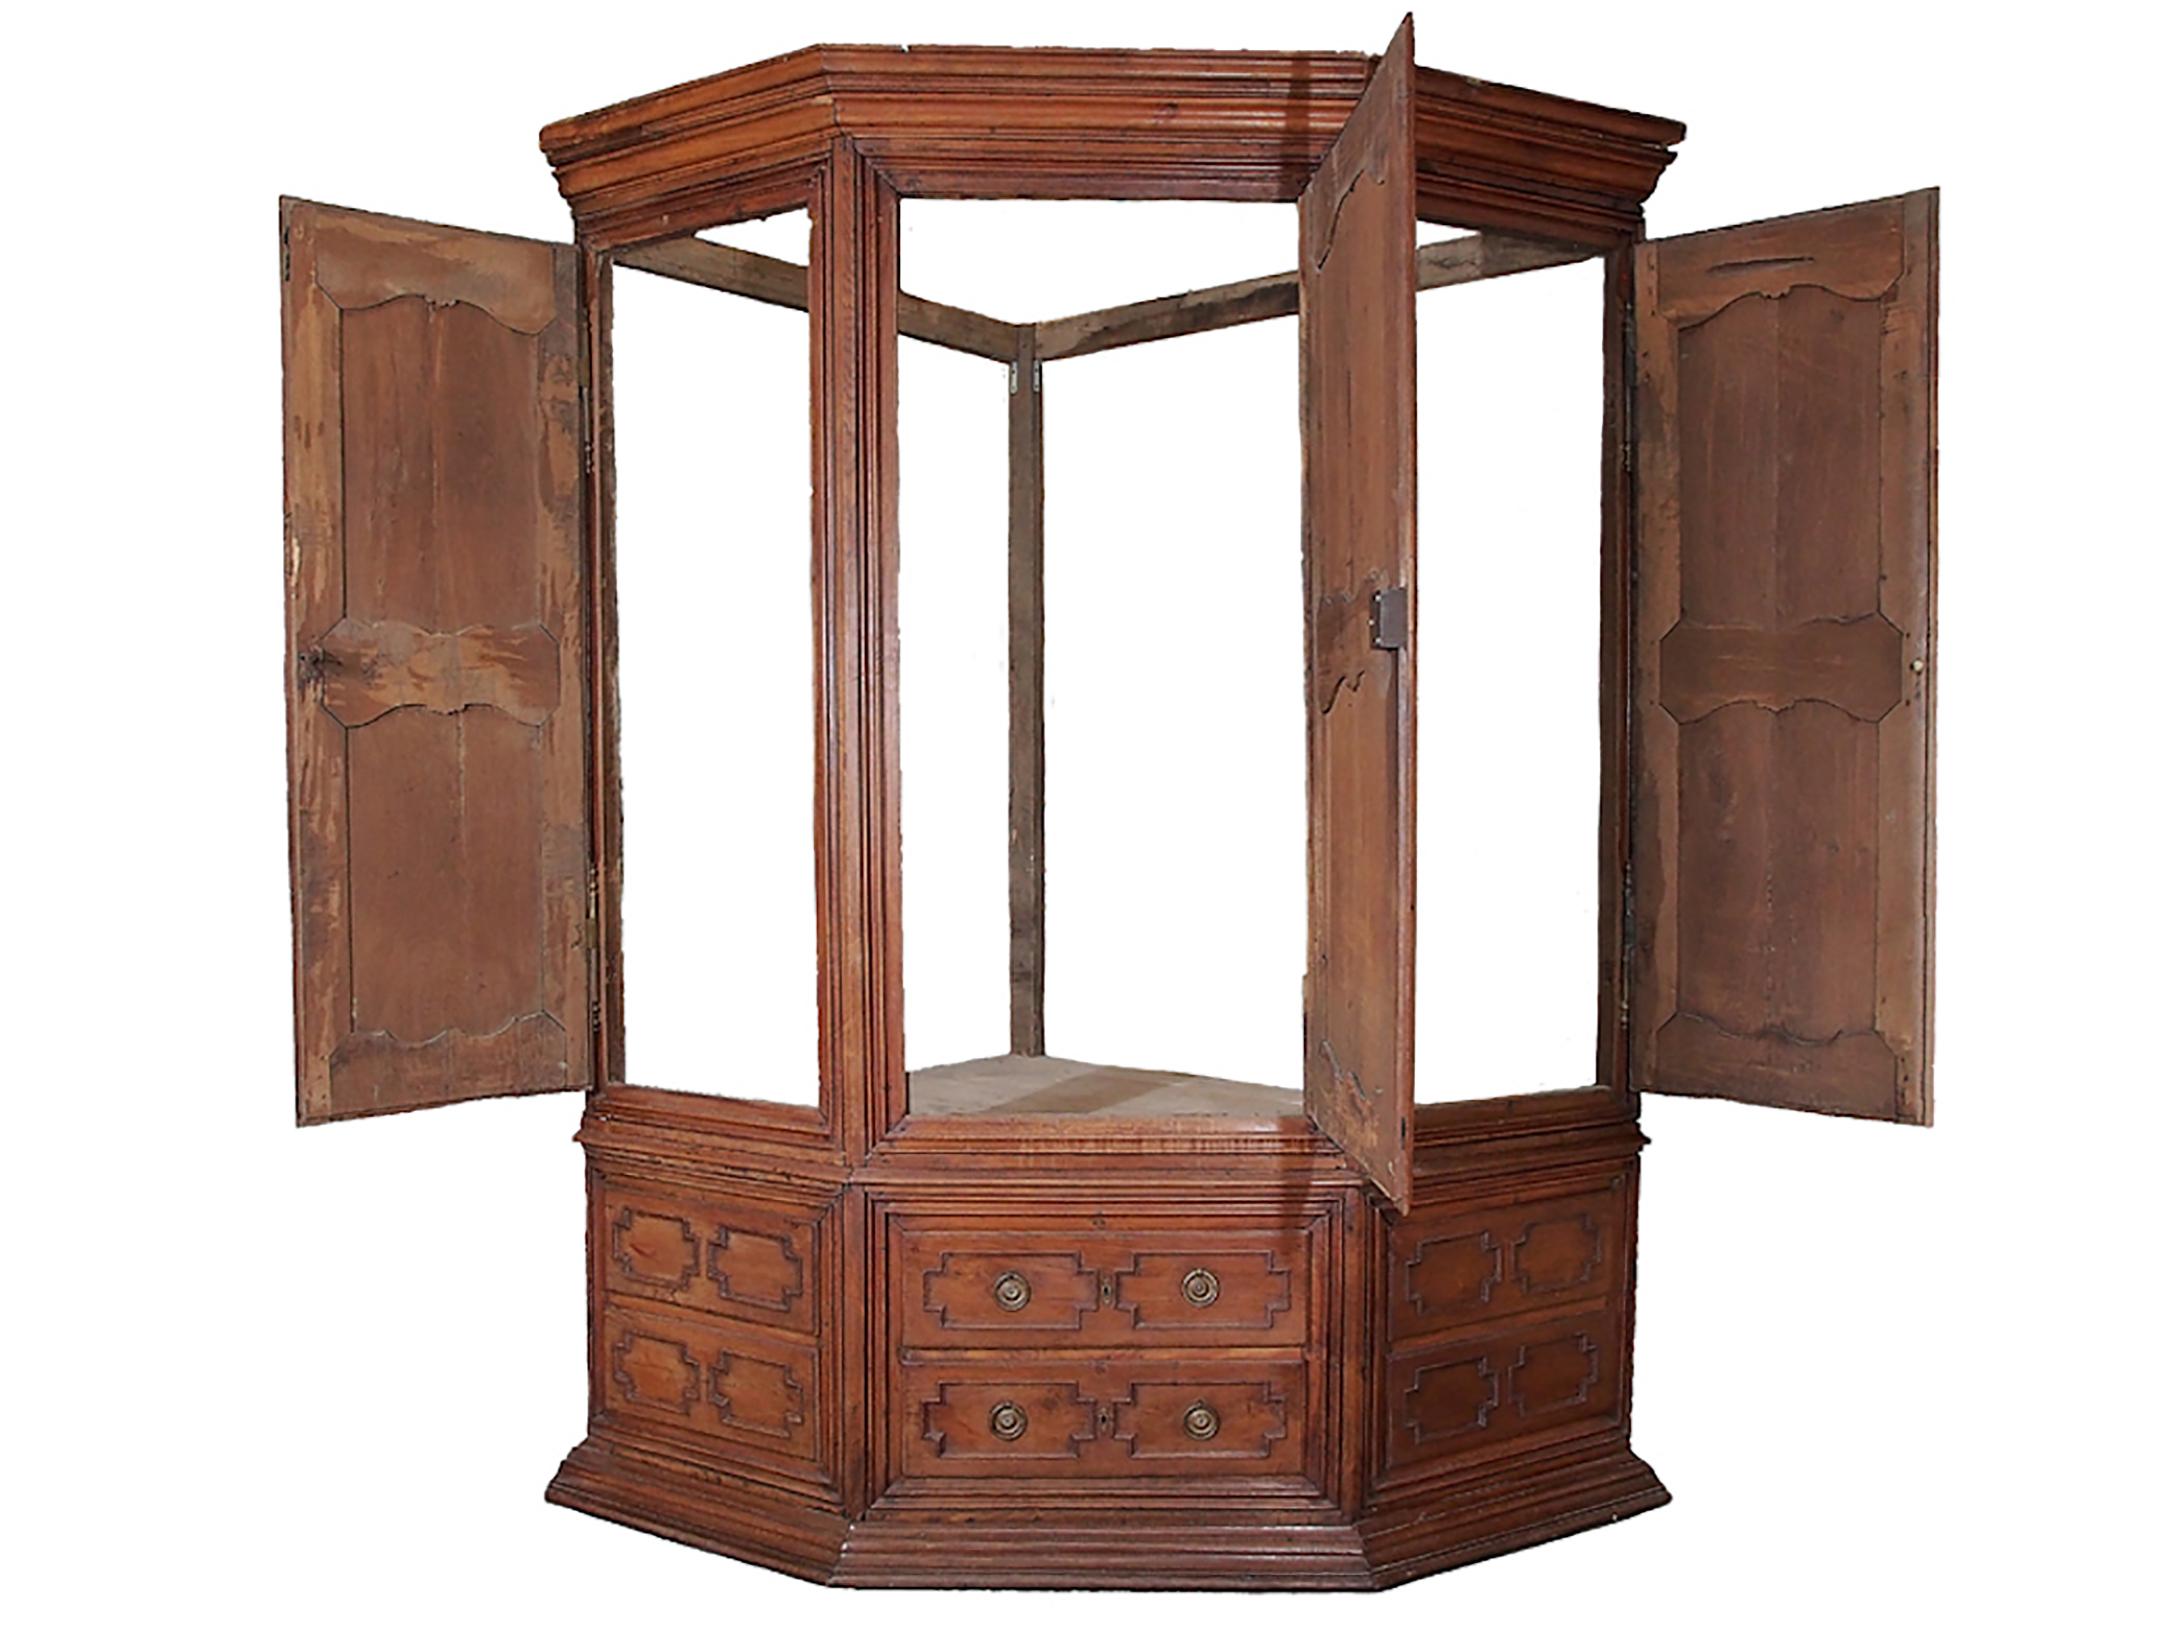 Gorgeous 18th century antique French Grande Louis XIV oak corner cabinet. This antique oversized oak corner cabinet mimics a stunning built in effect and will add architectural interest. Rich wood character and polished carving with lots of drawer